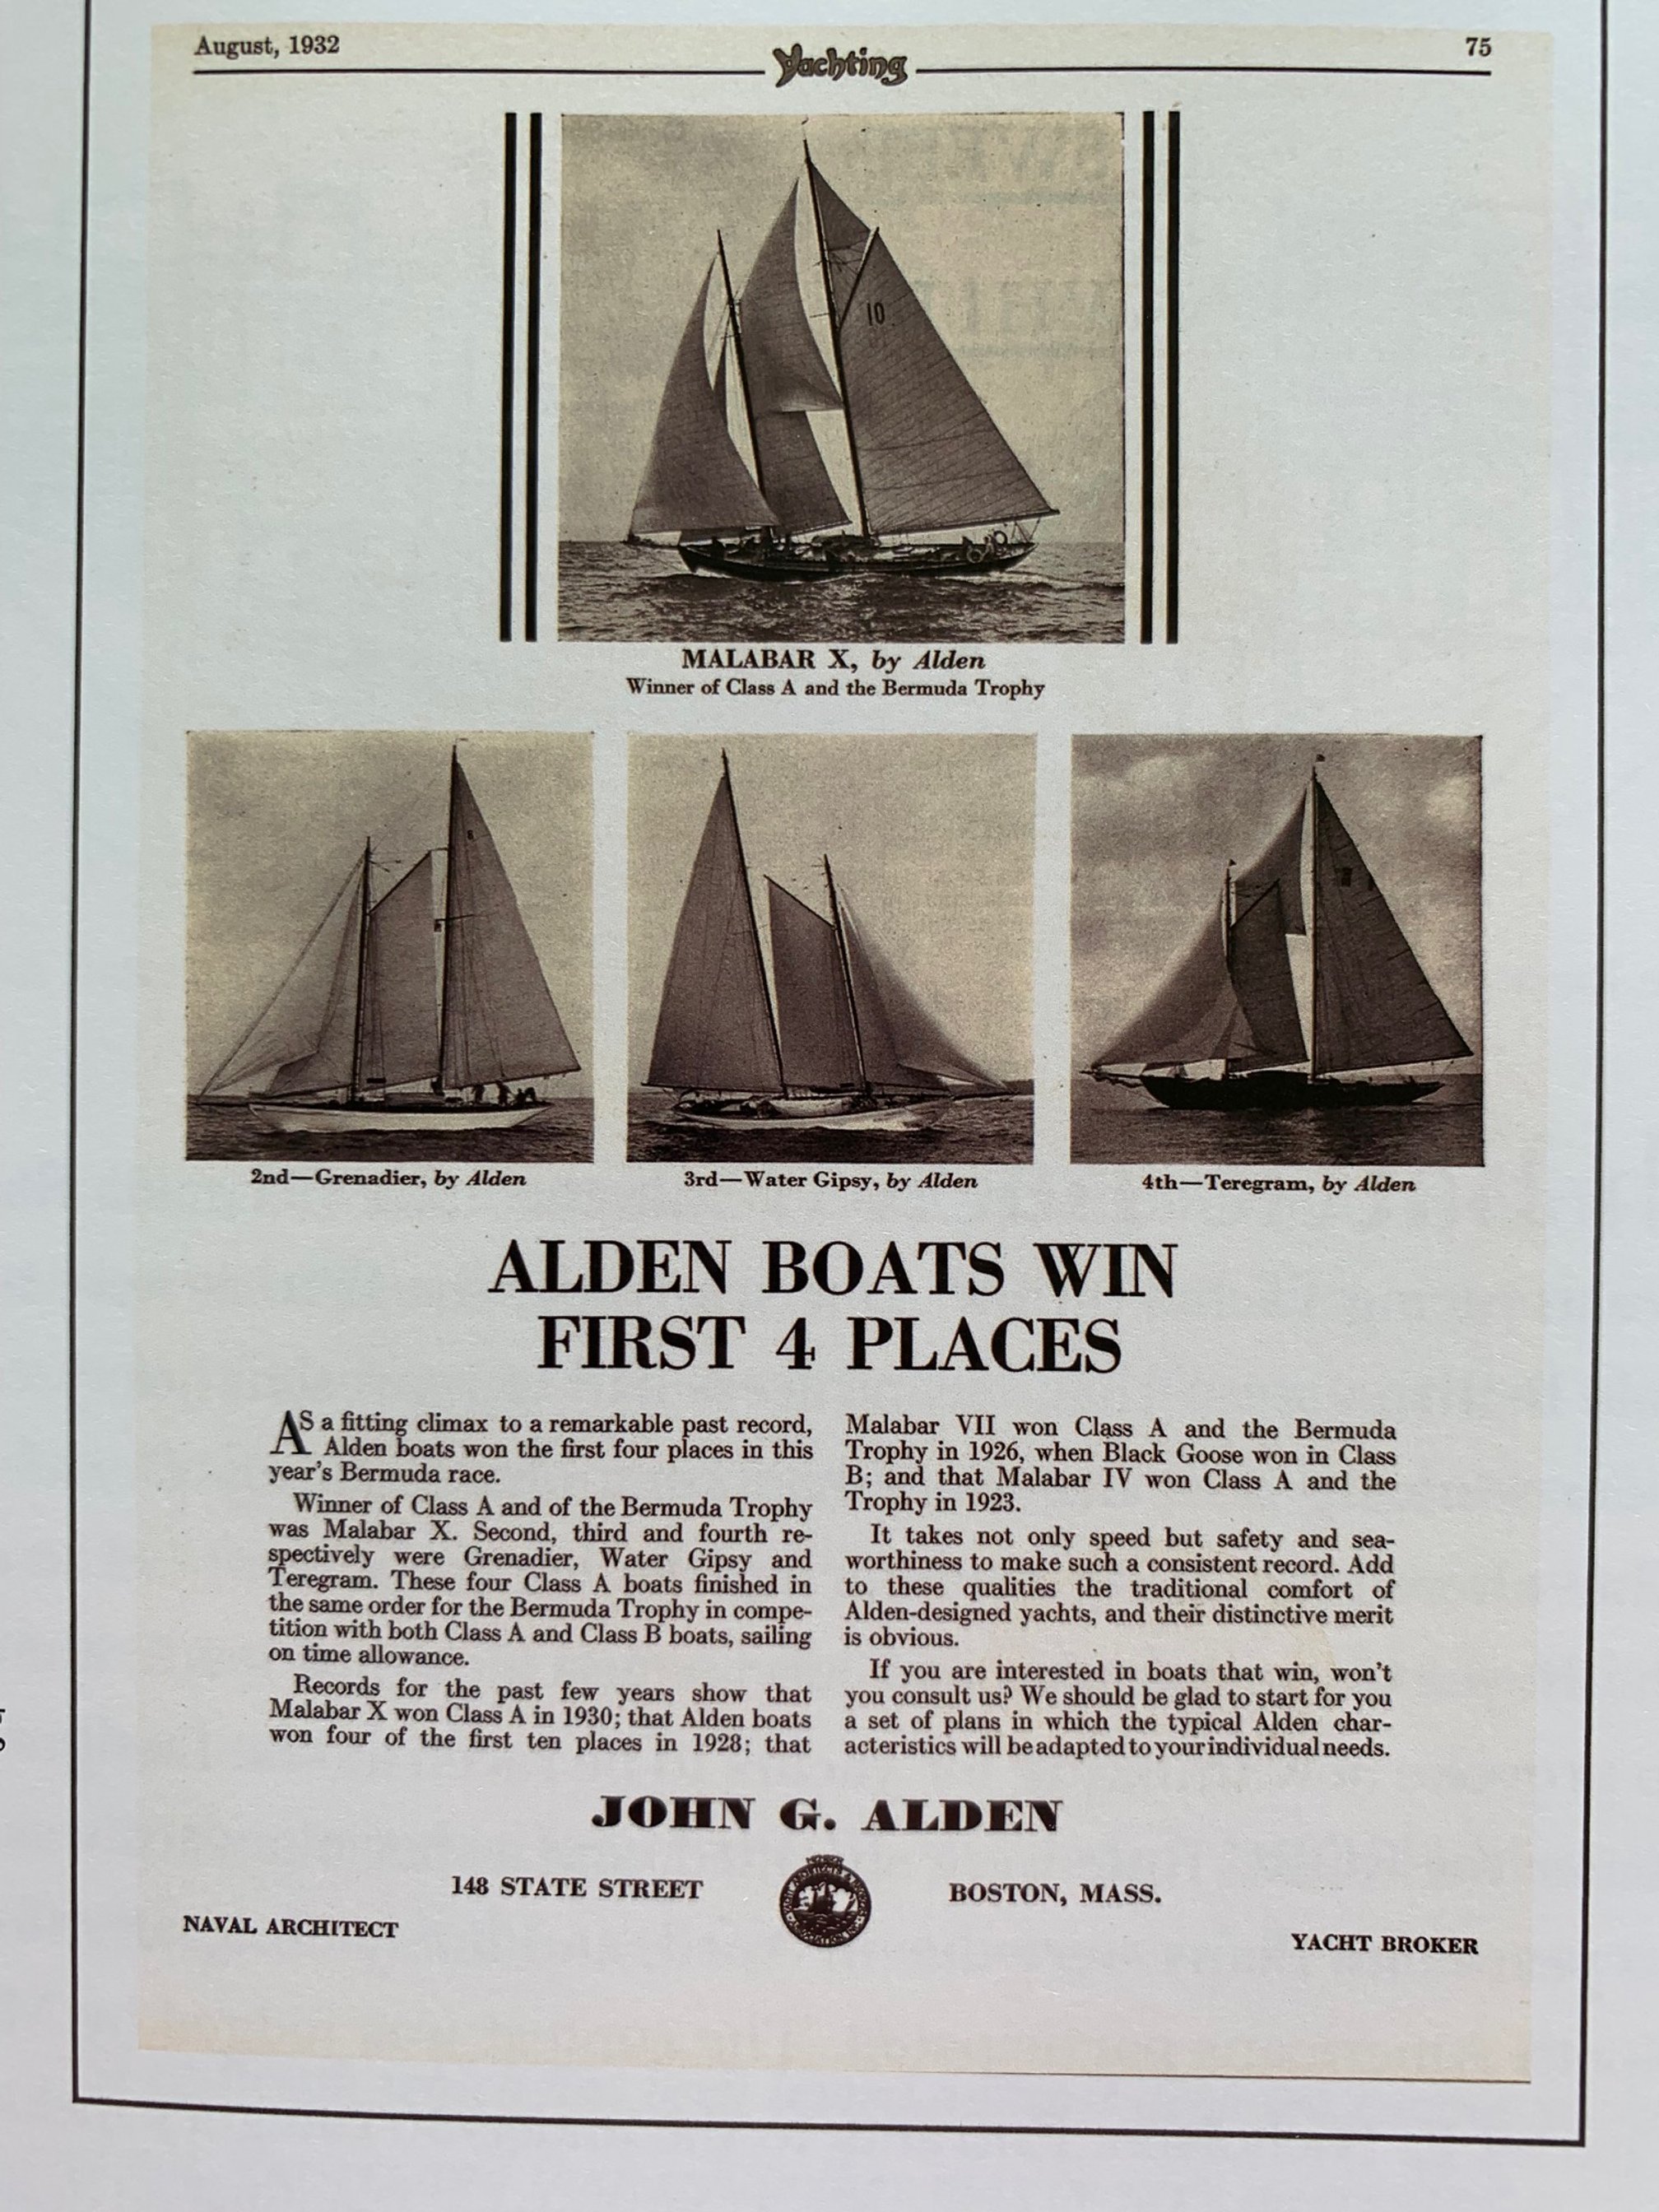 Alden's designs dominated the early history of the Bermuda Race.